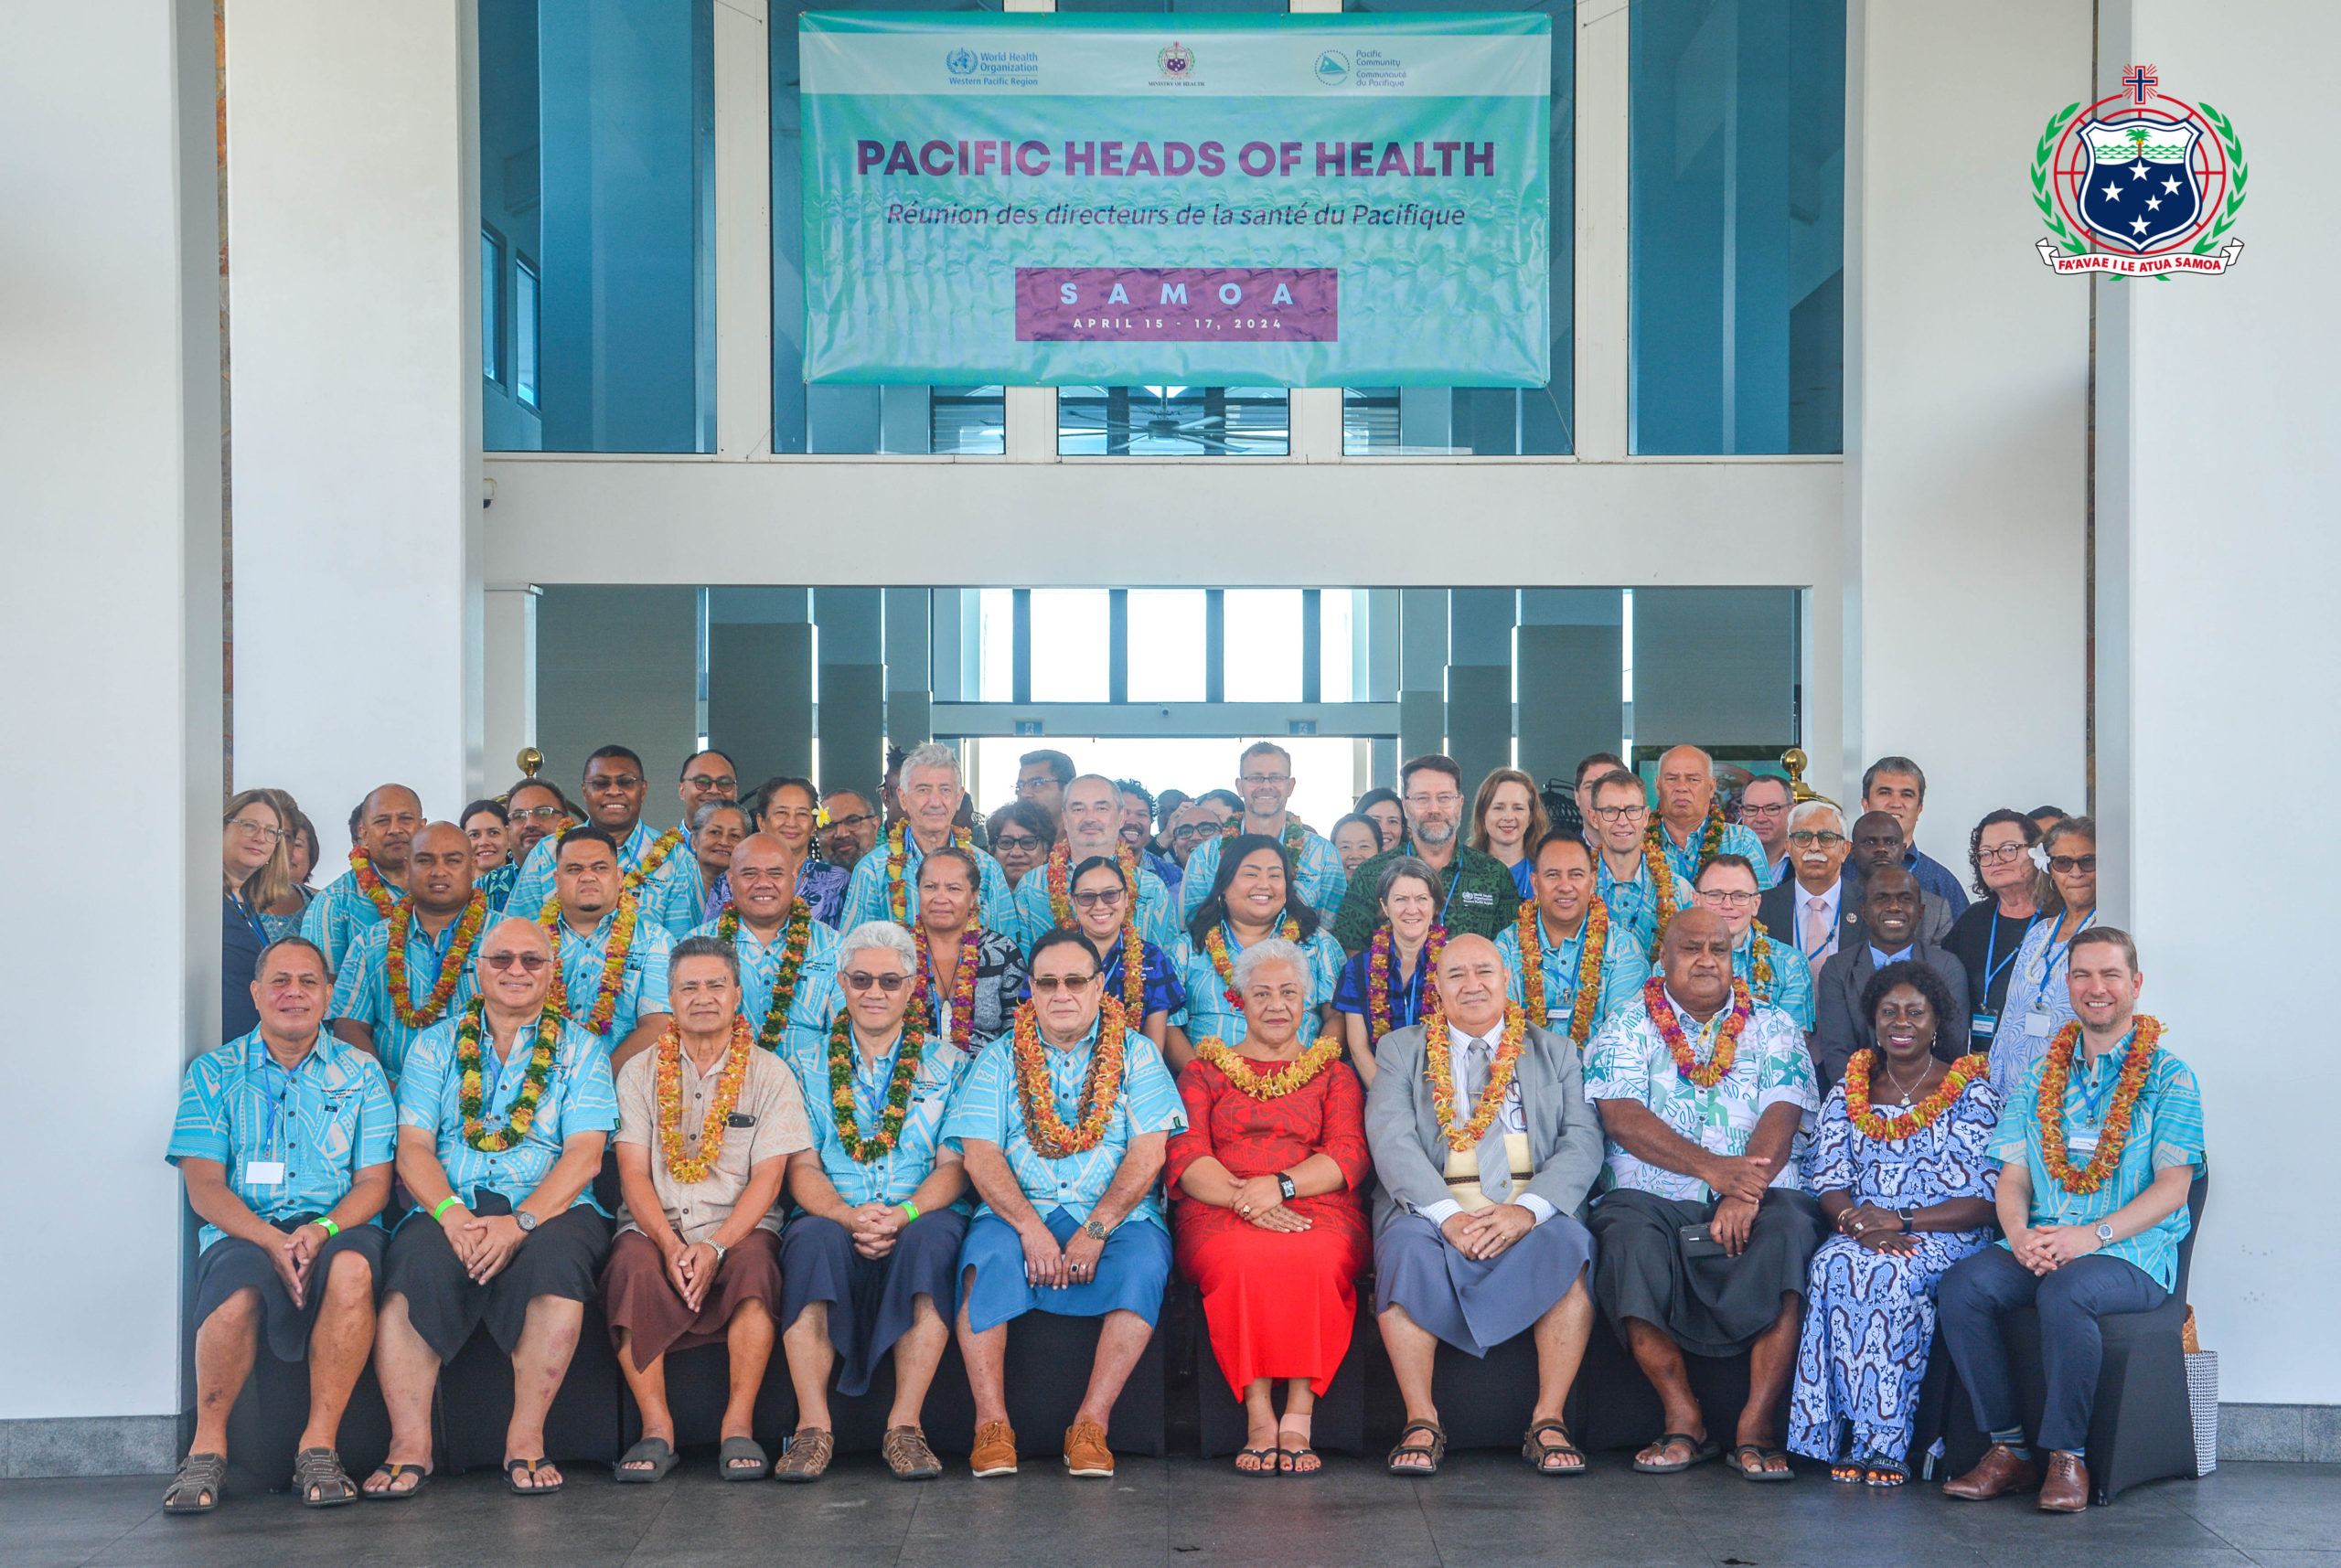 Hon. Prime Minister’s Keynote Speech for Pacific Heads of Health Meeting